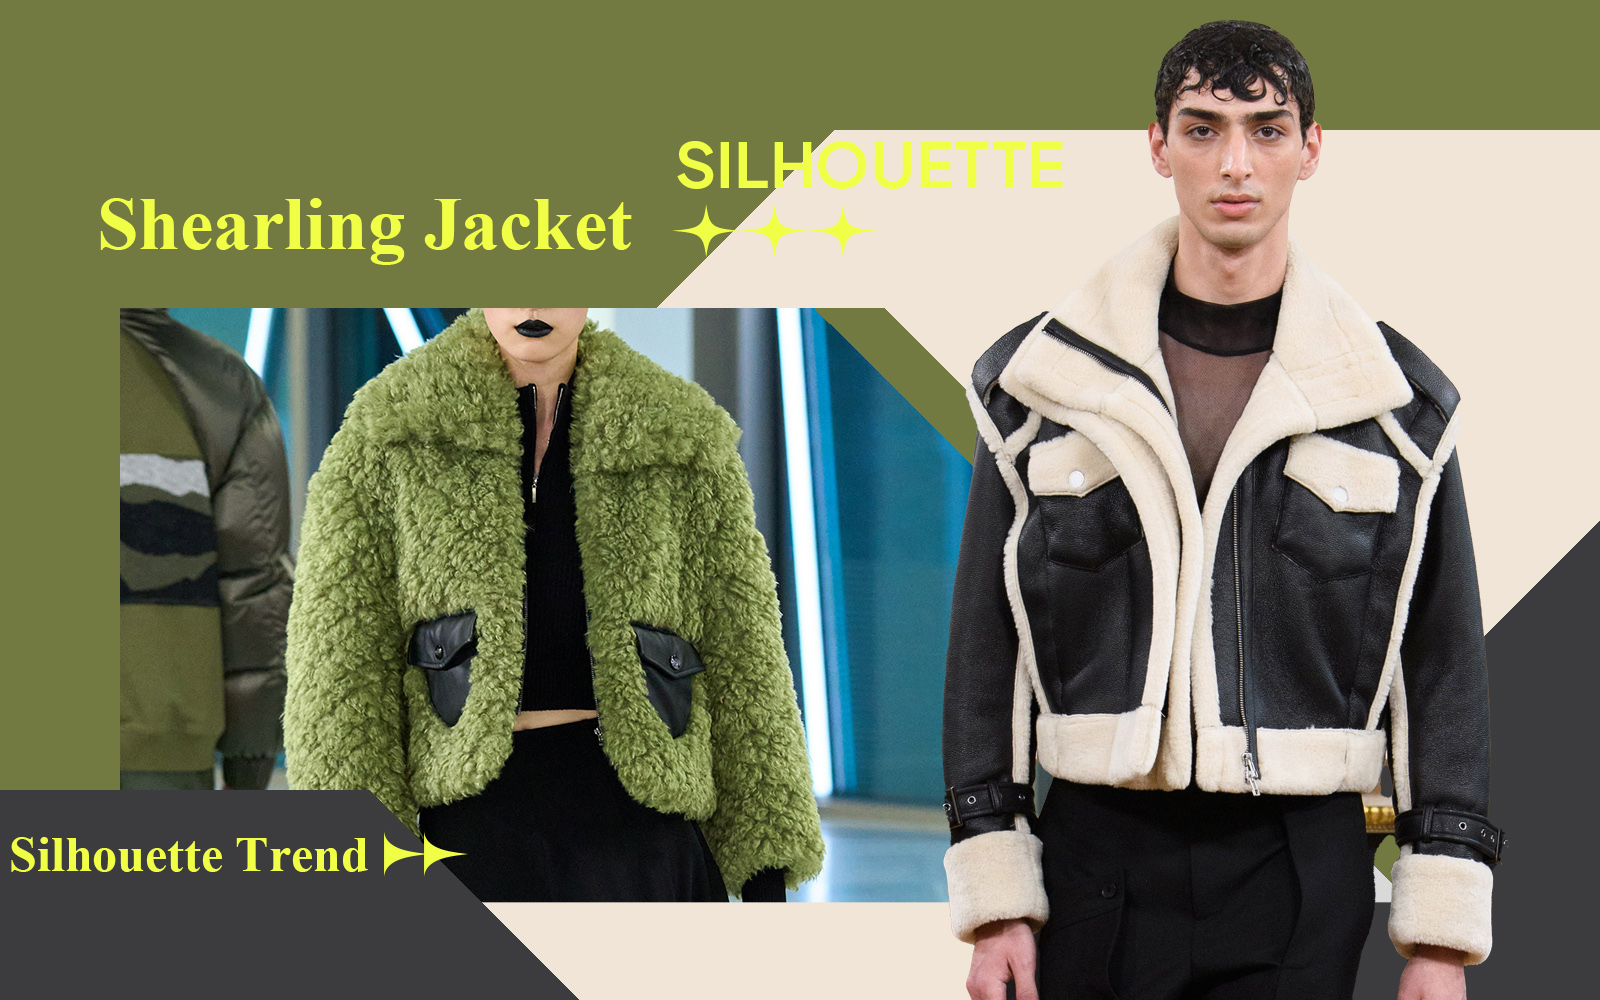 The Silhouette Trend for Shearling Jacket